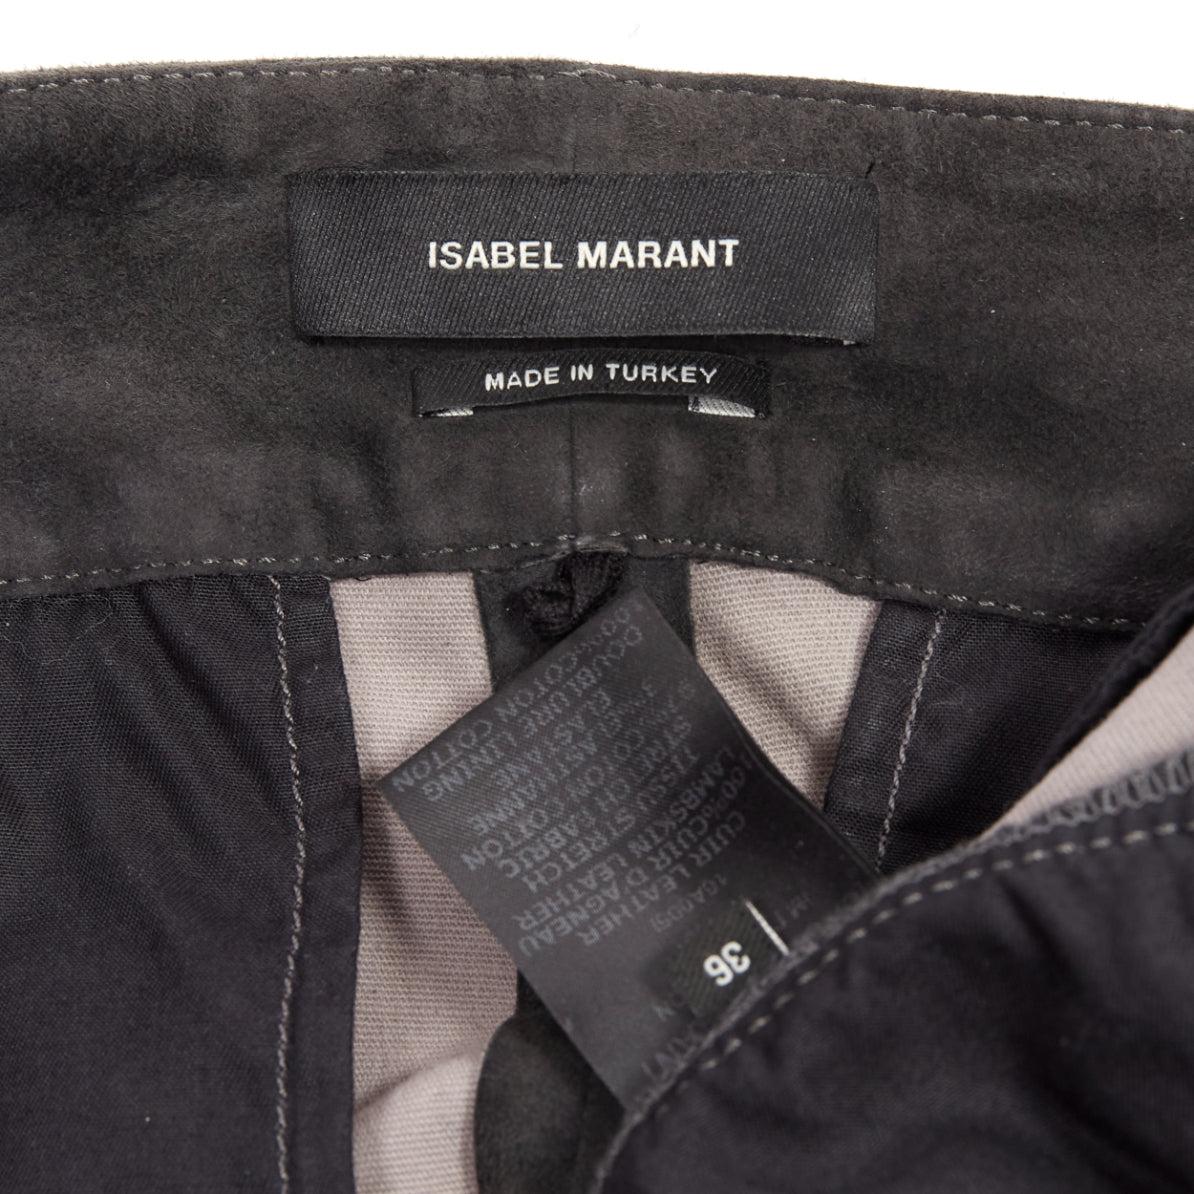 ISABEL MARANT 100% lambskin suede leather grey high waisted skinny pants FR36 S For Sale 4